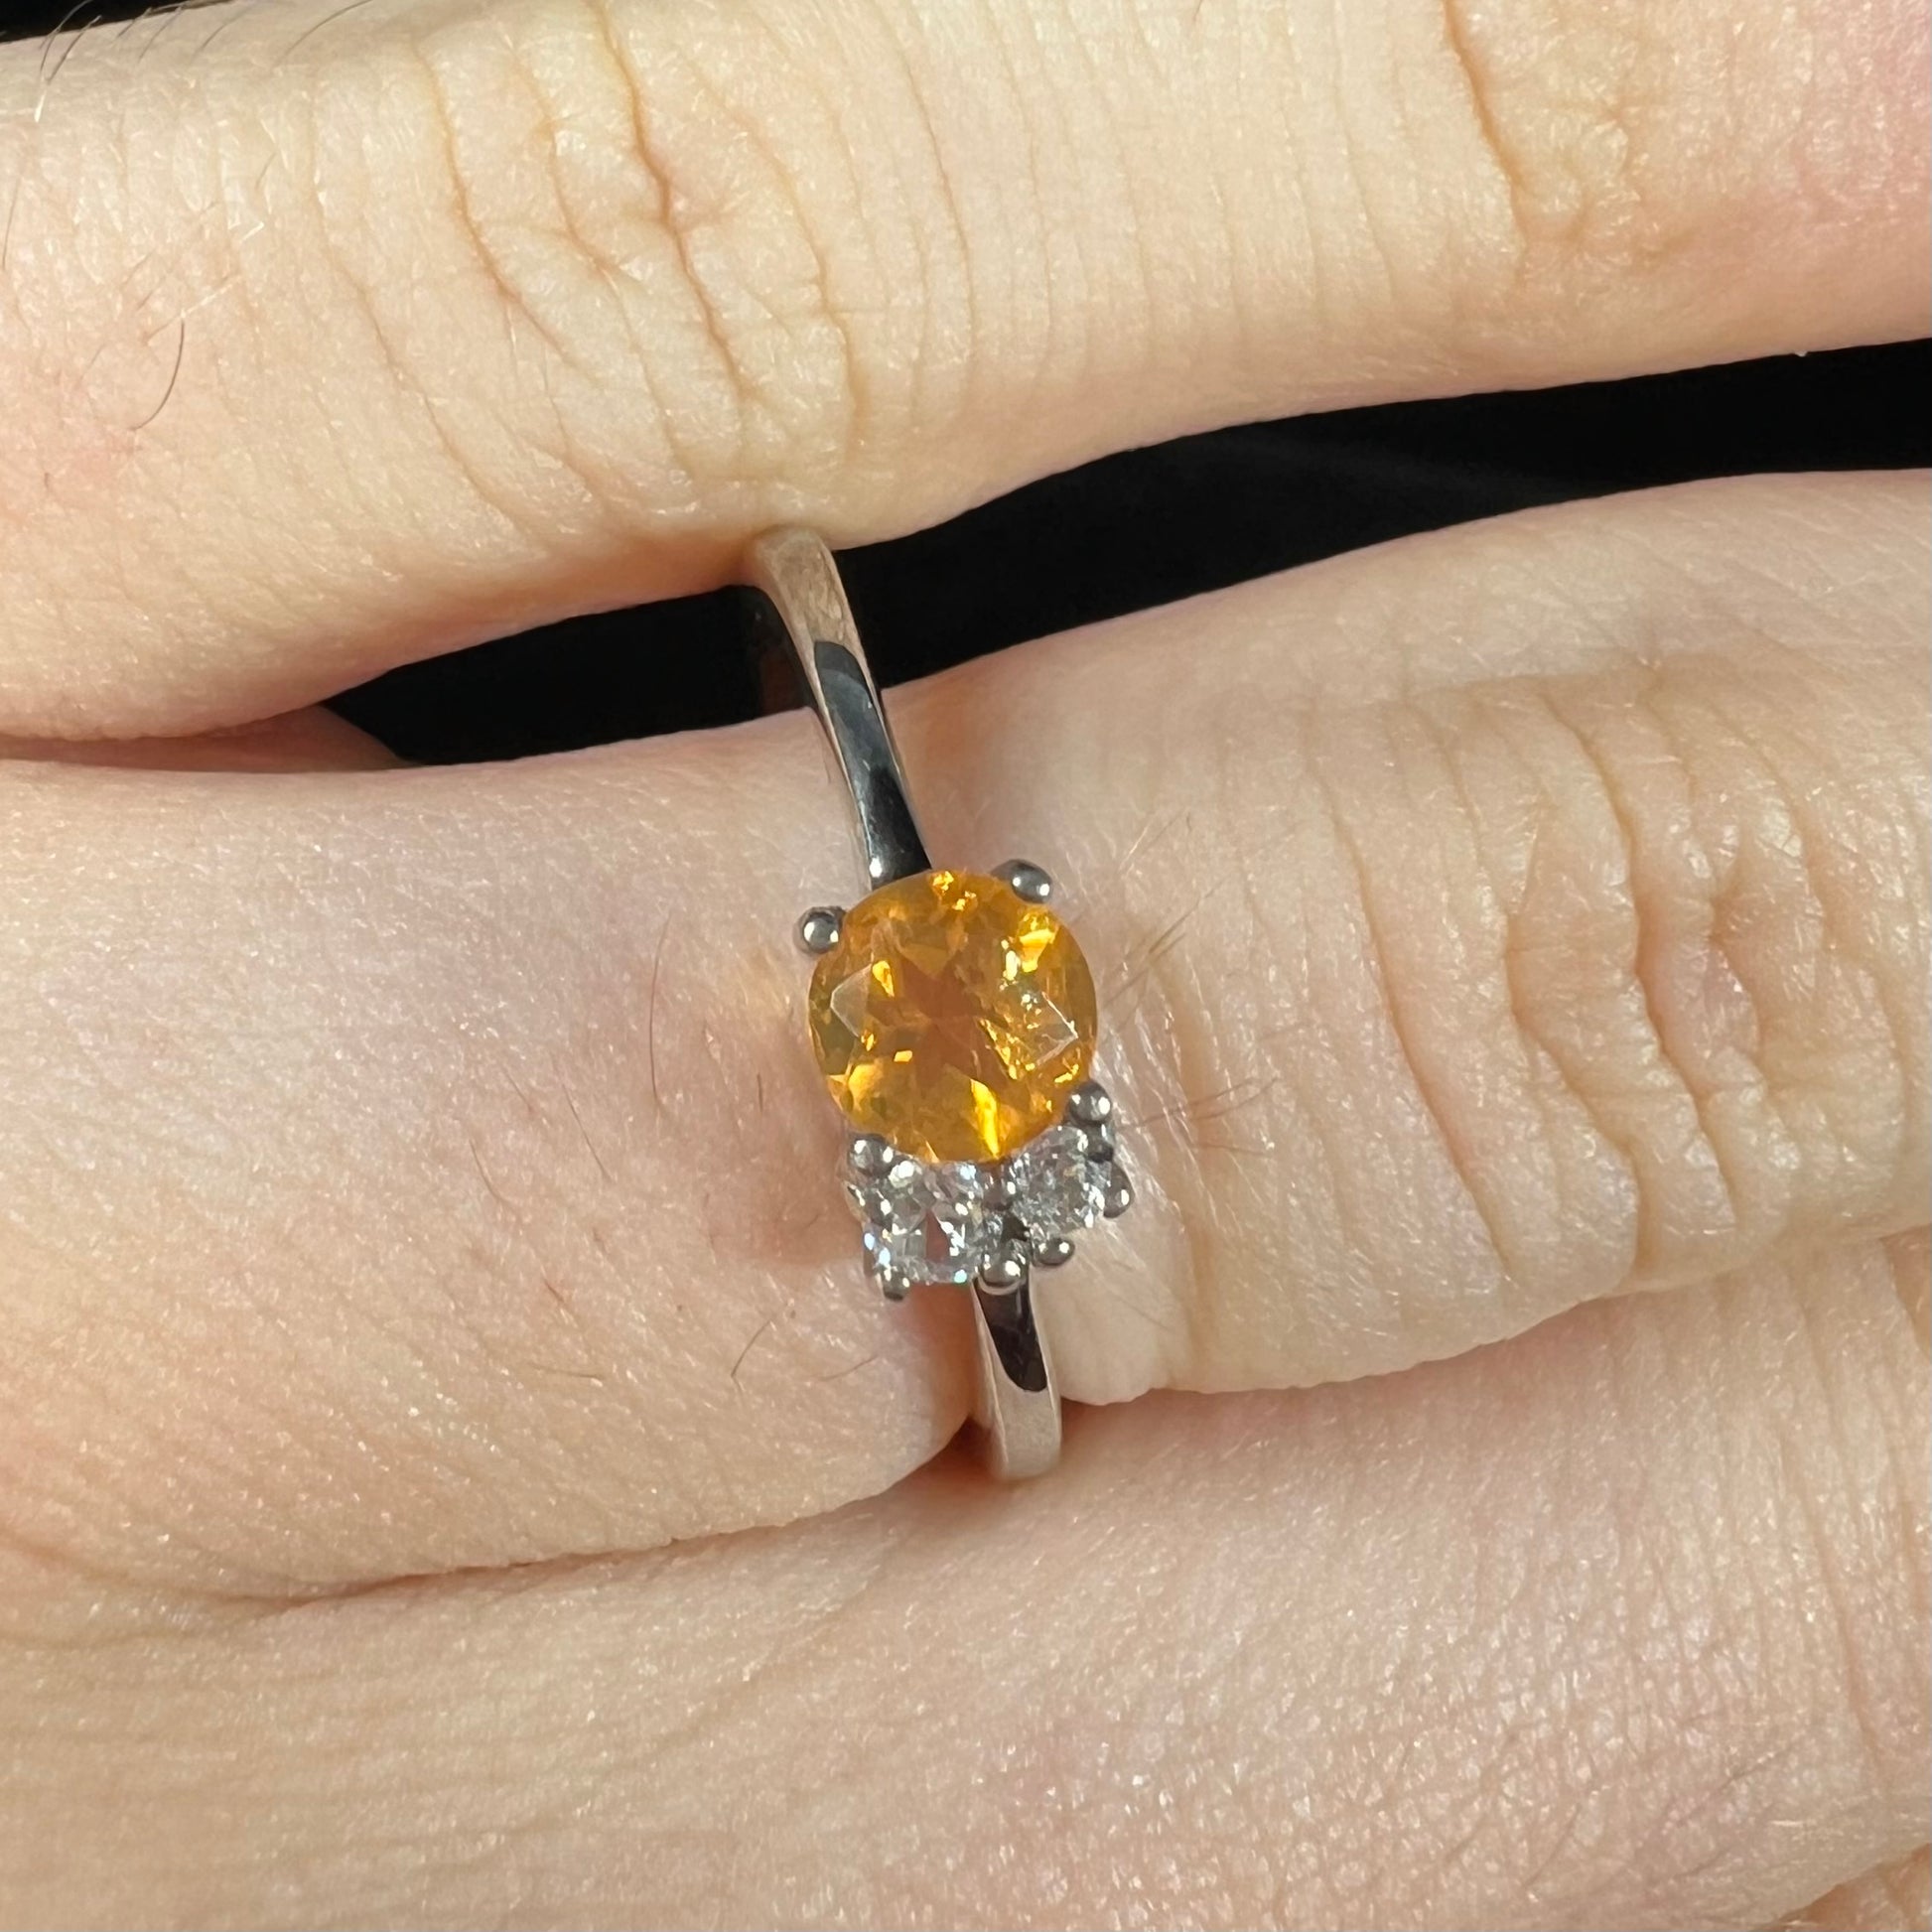 A ladies' sterling silver ring set with a faceted round cut fire opal and white zircon accents.